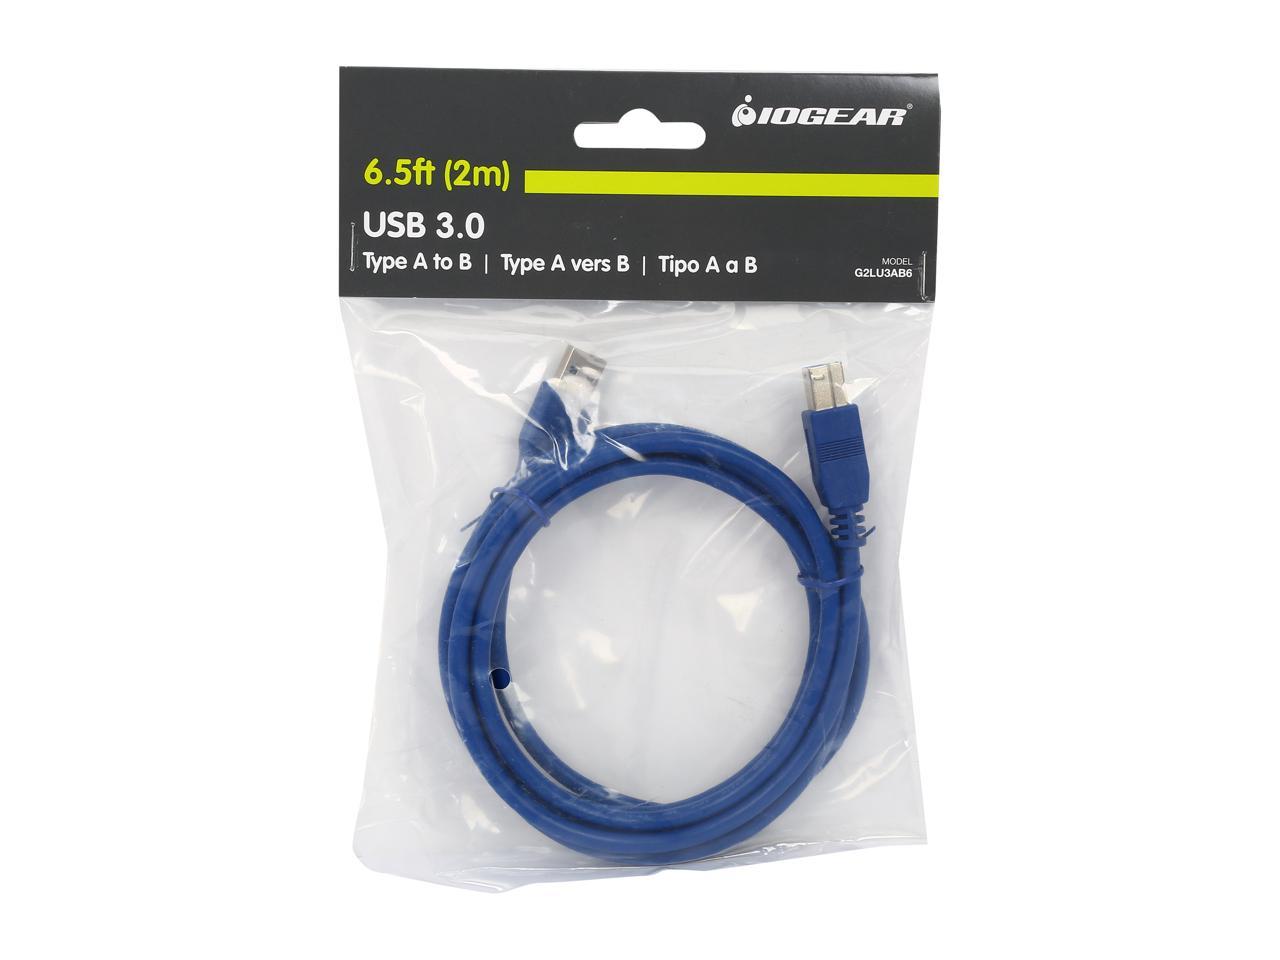 IOGEAR G2LU3AB6 Blue USB 3.0 Type A to B Cable